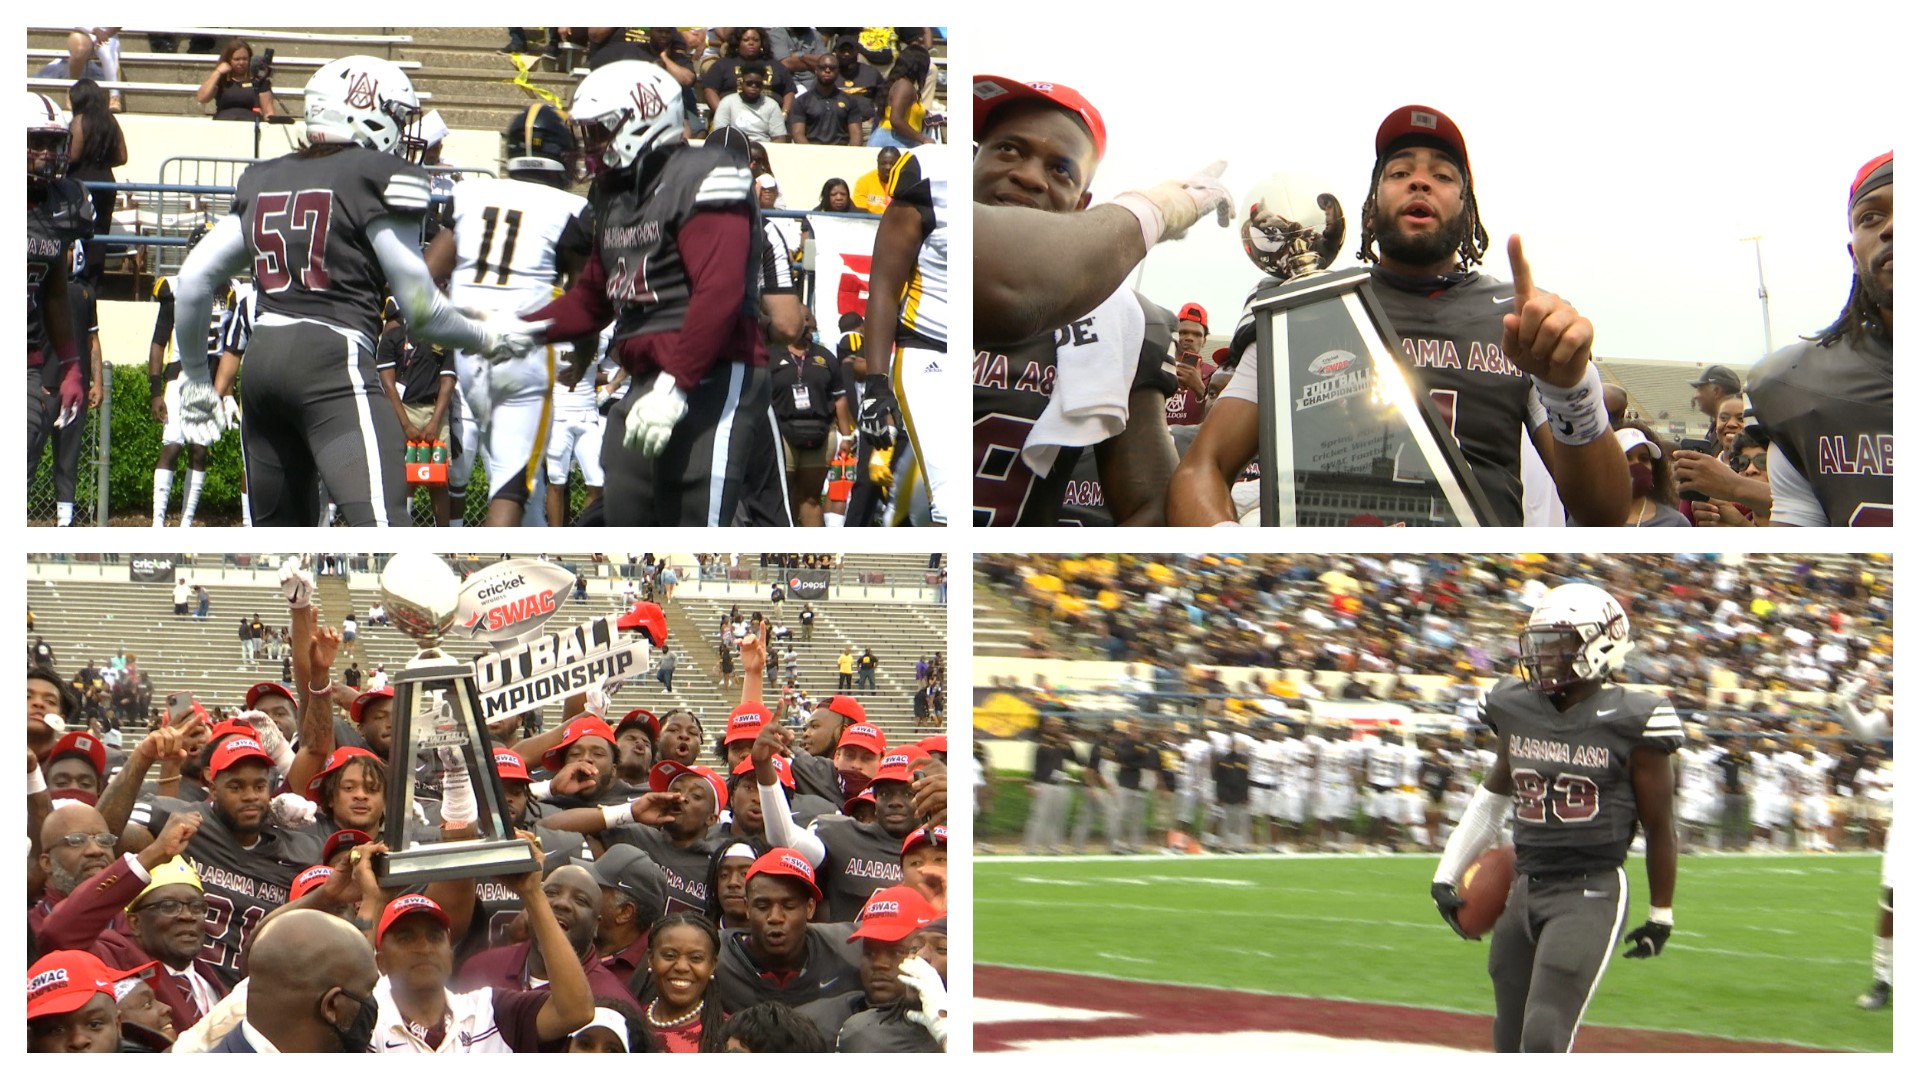 Aqeel Glass threw three touchdown passes, Gary Quarles ran for two TDs, and Alabama A&M beat Arkansas-Pine Bluff 40-33 in the SWAC Championship!